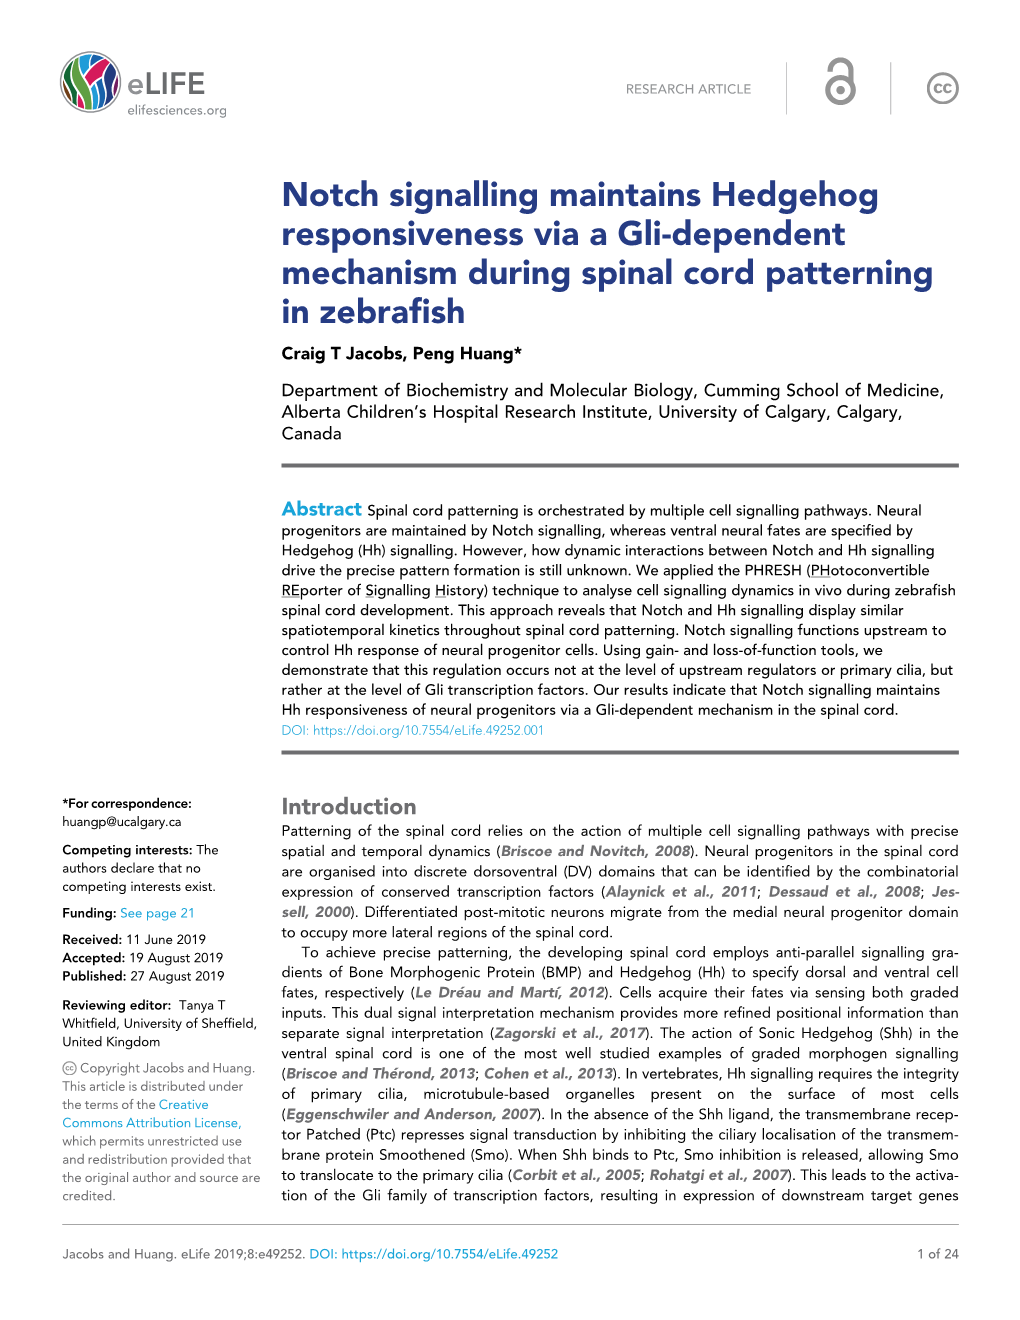 Notch Signalling Maintains Hedgehog Responsiveness Via a Gli-Dependent Mechanism During Spinal Cord Patterning in Zebrafish Craig T Jacobs, Peng Huang*